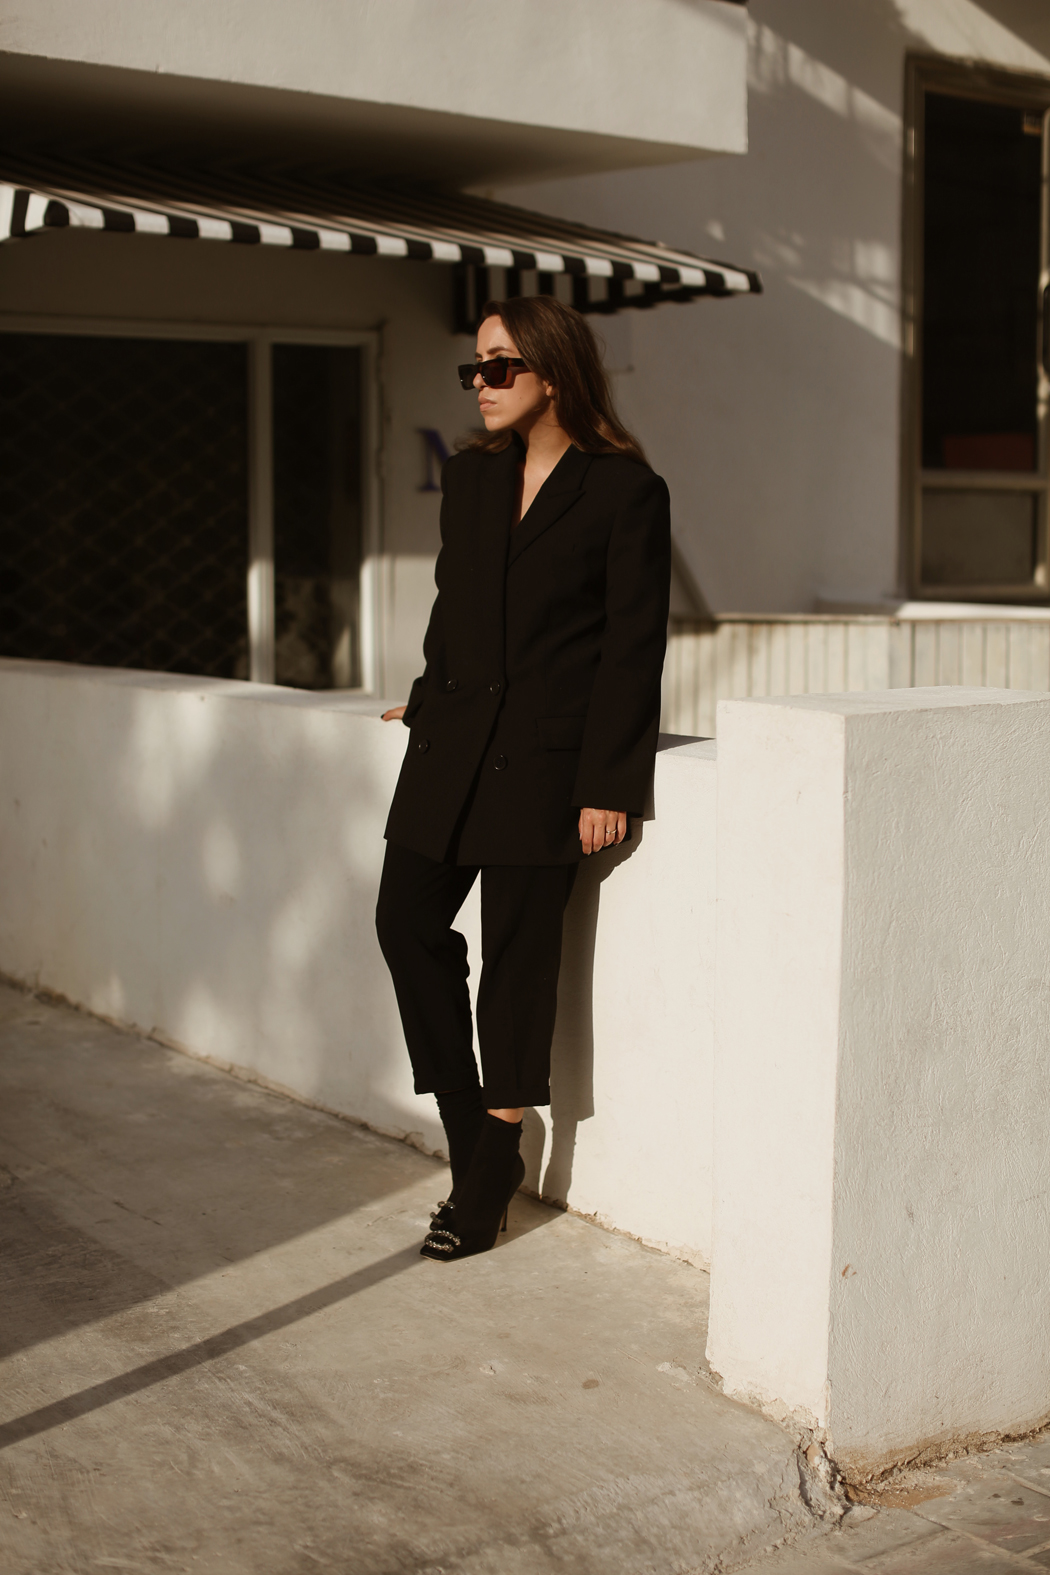 All Black Outfit Gucci Dionysus Pumps - A series by Fiona Dinkelbach